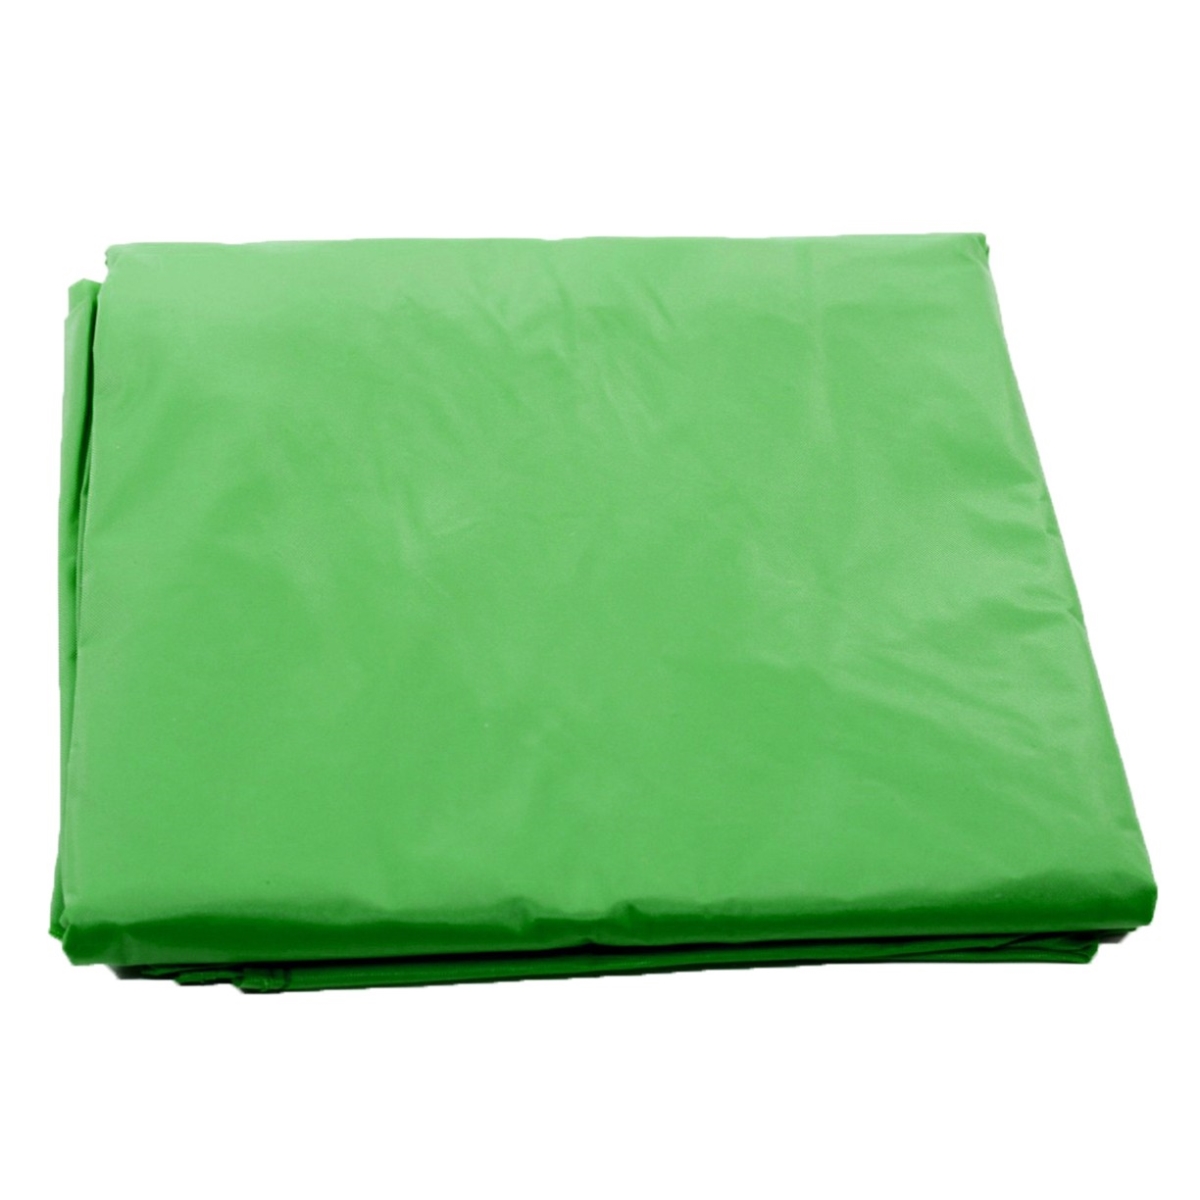 18-148grn 8 Ft. Dust Pool Table Cover, Green